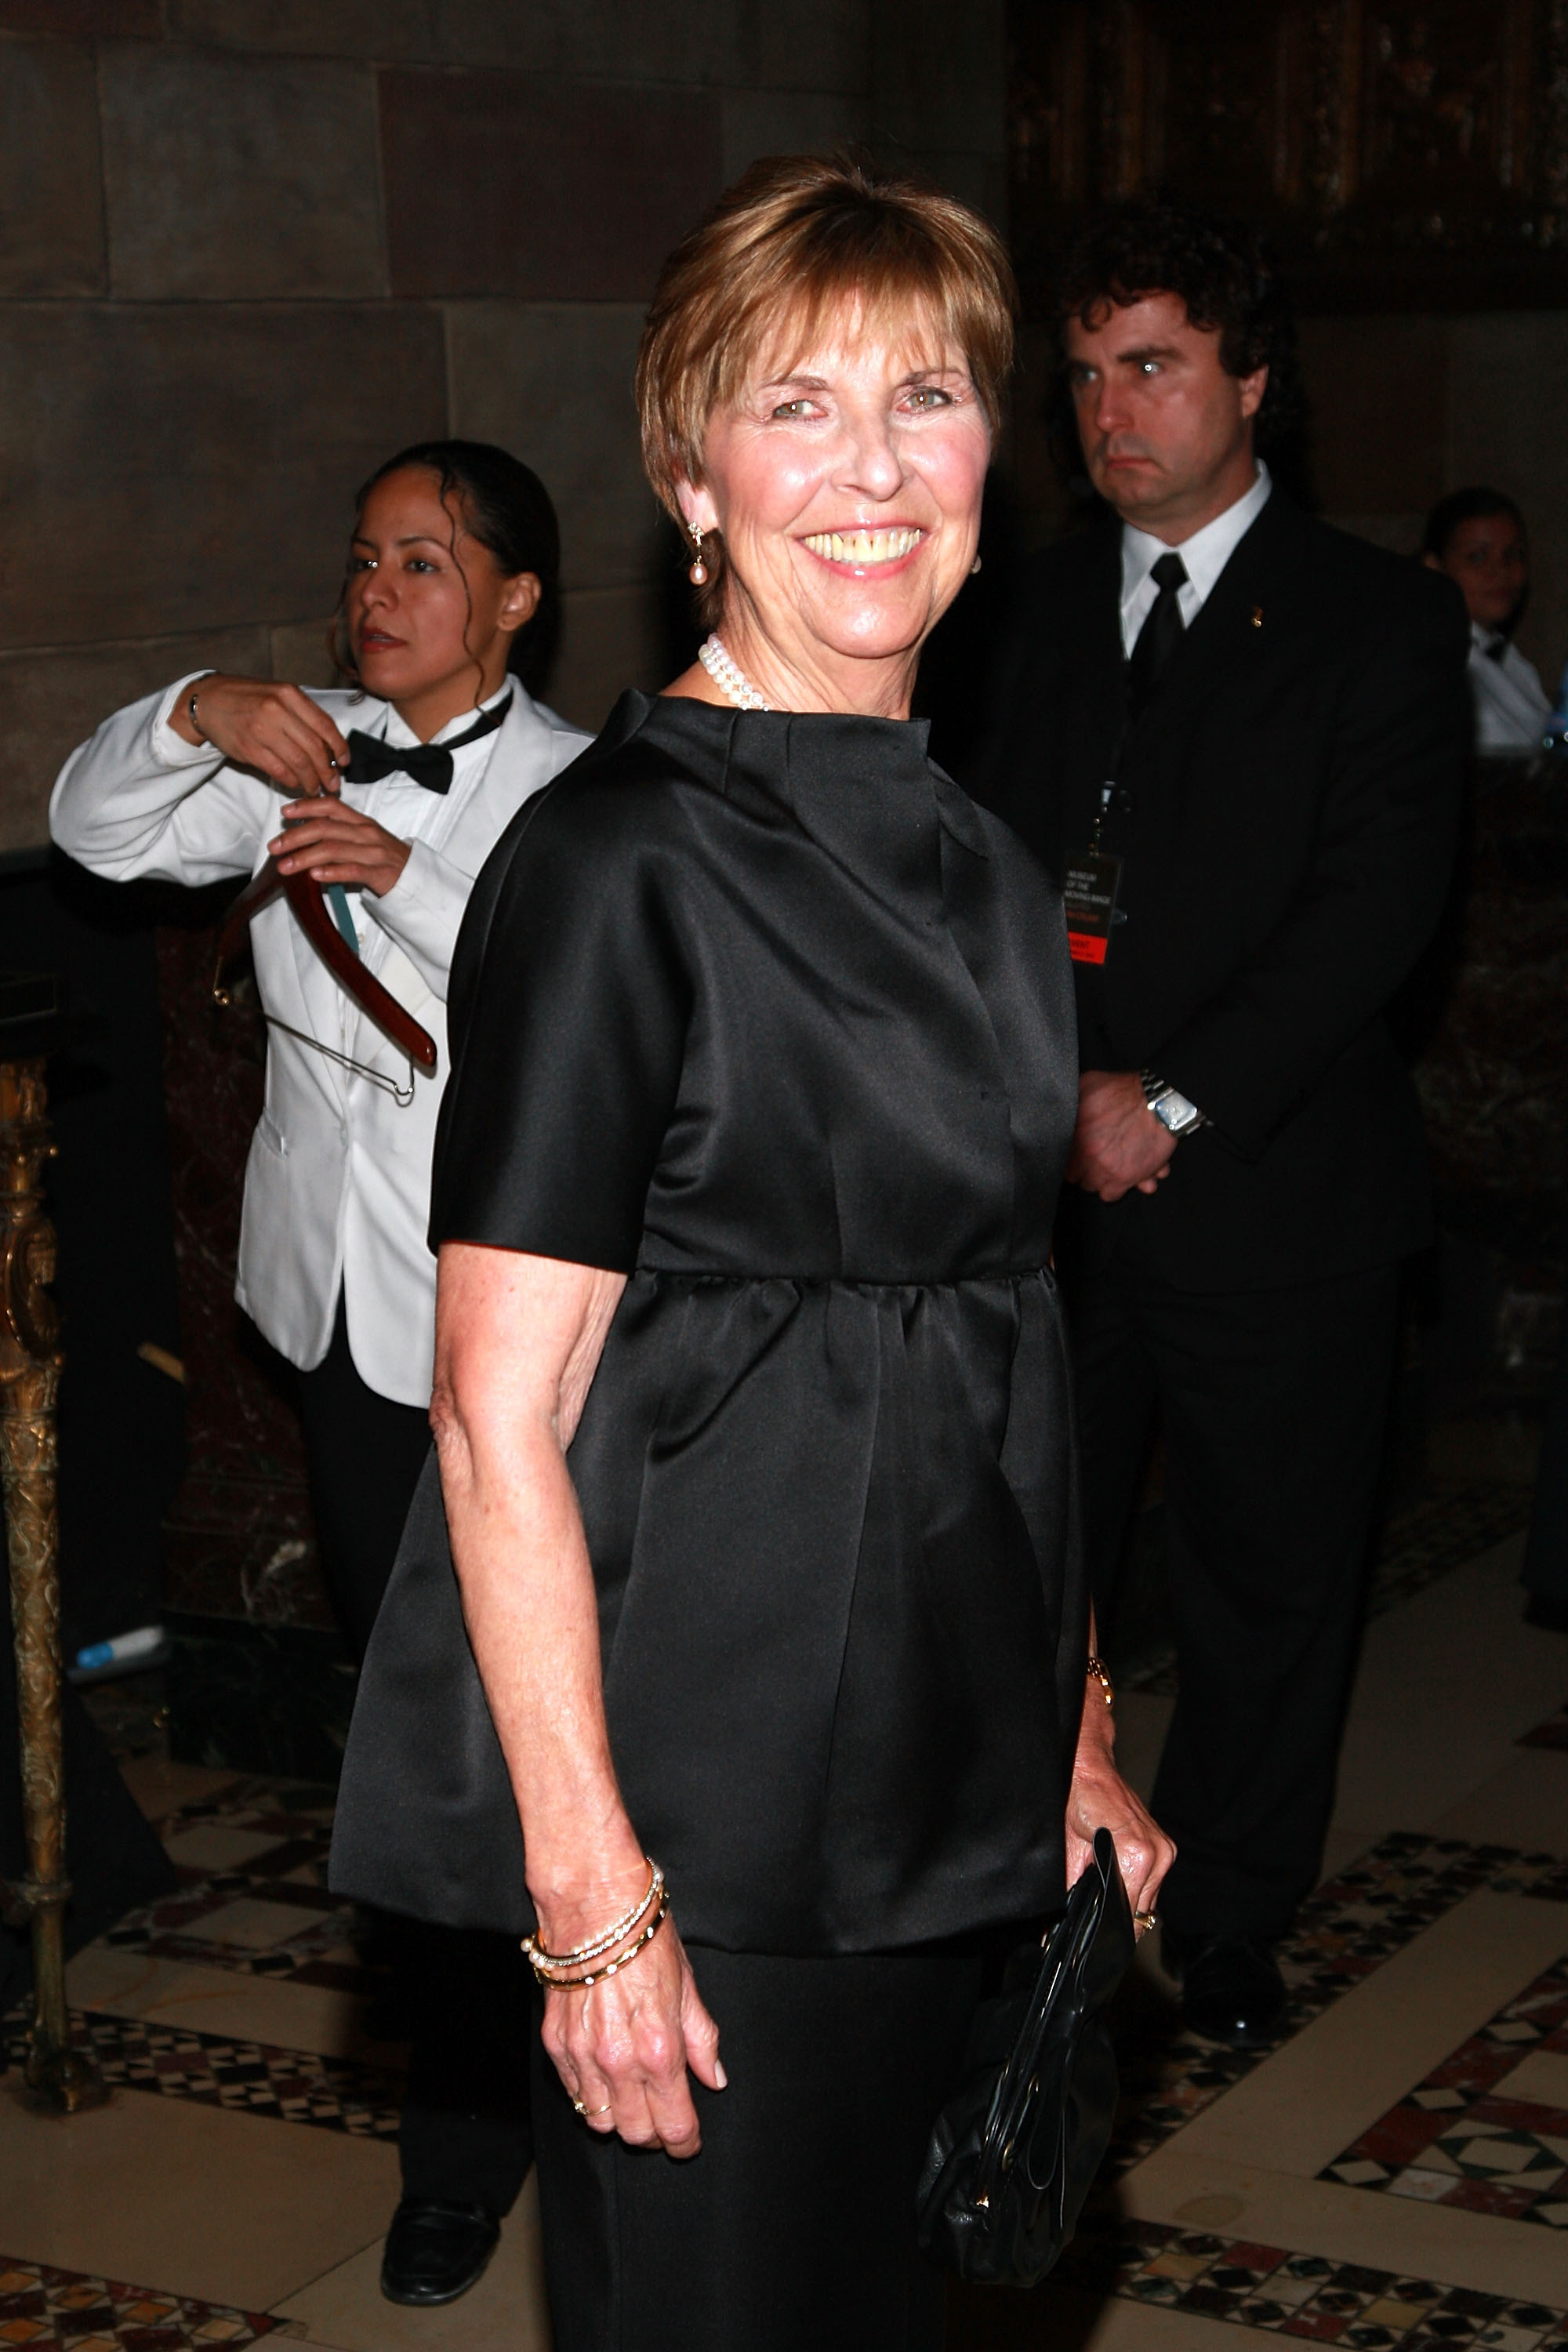 Mary Lee South attends the 3rd Annual Museum of the Moving Image Black Tie Salute Honoring Tom Cruise in New York City, on November 6, 2007. | Source: Getty Images